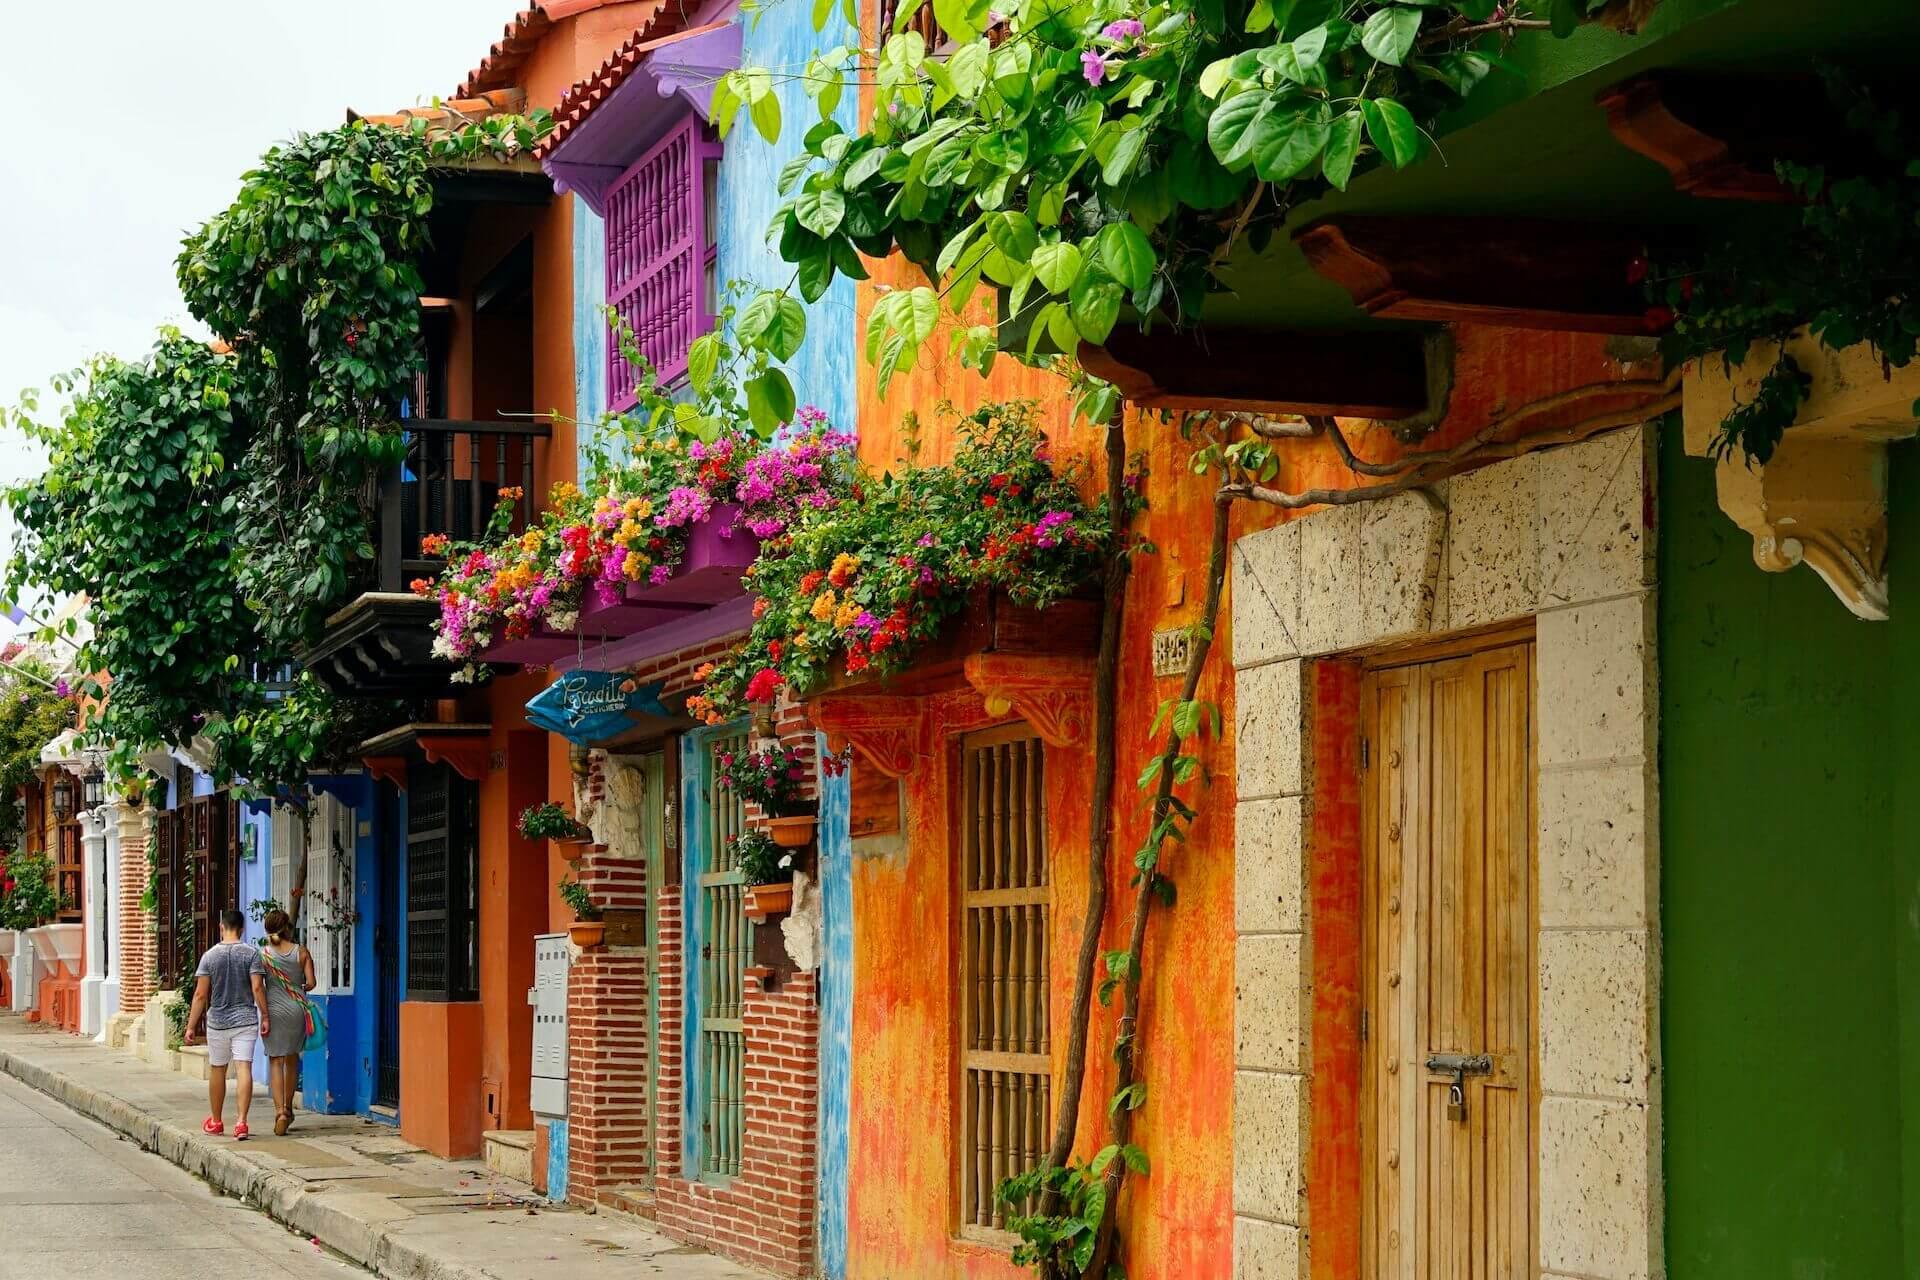 View of the colorful houses in Colombia